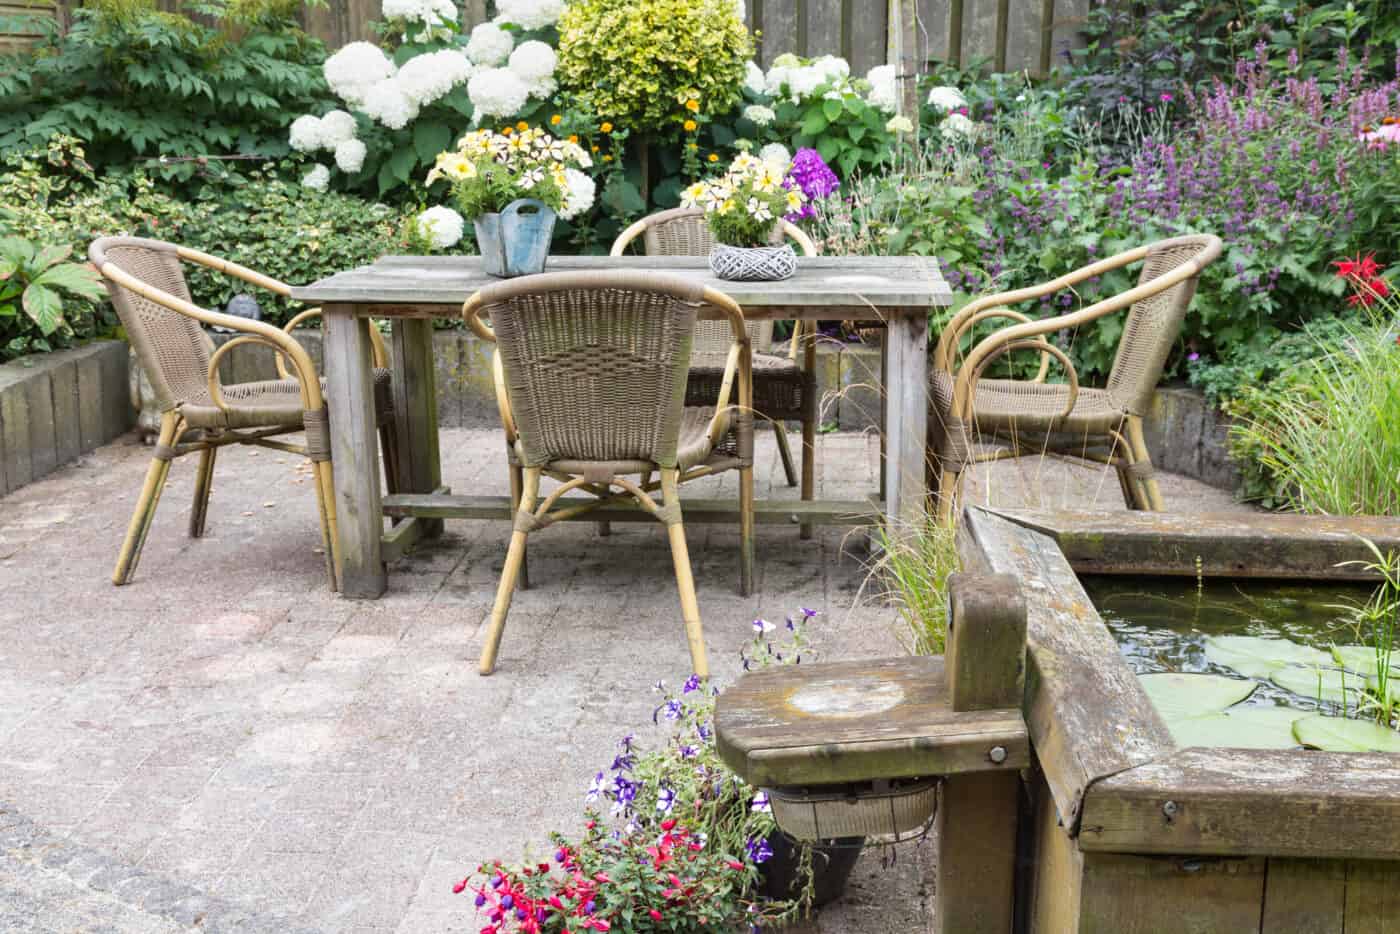 Wooden table and chairs in an ornamental garden with pond